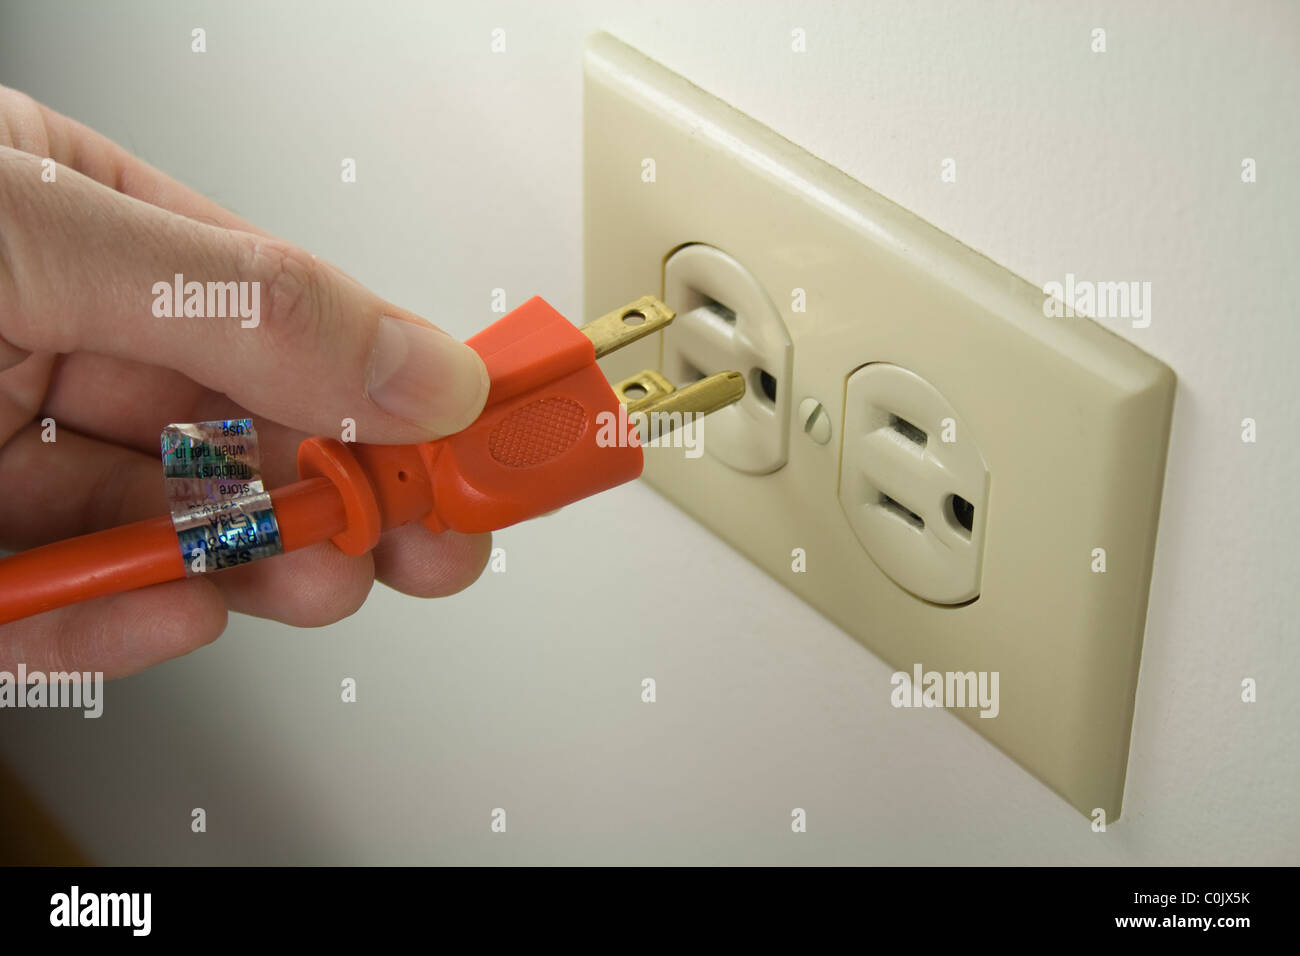 Hand Plugging Power Cord into Wall Outlet - Electrical Stock Photo